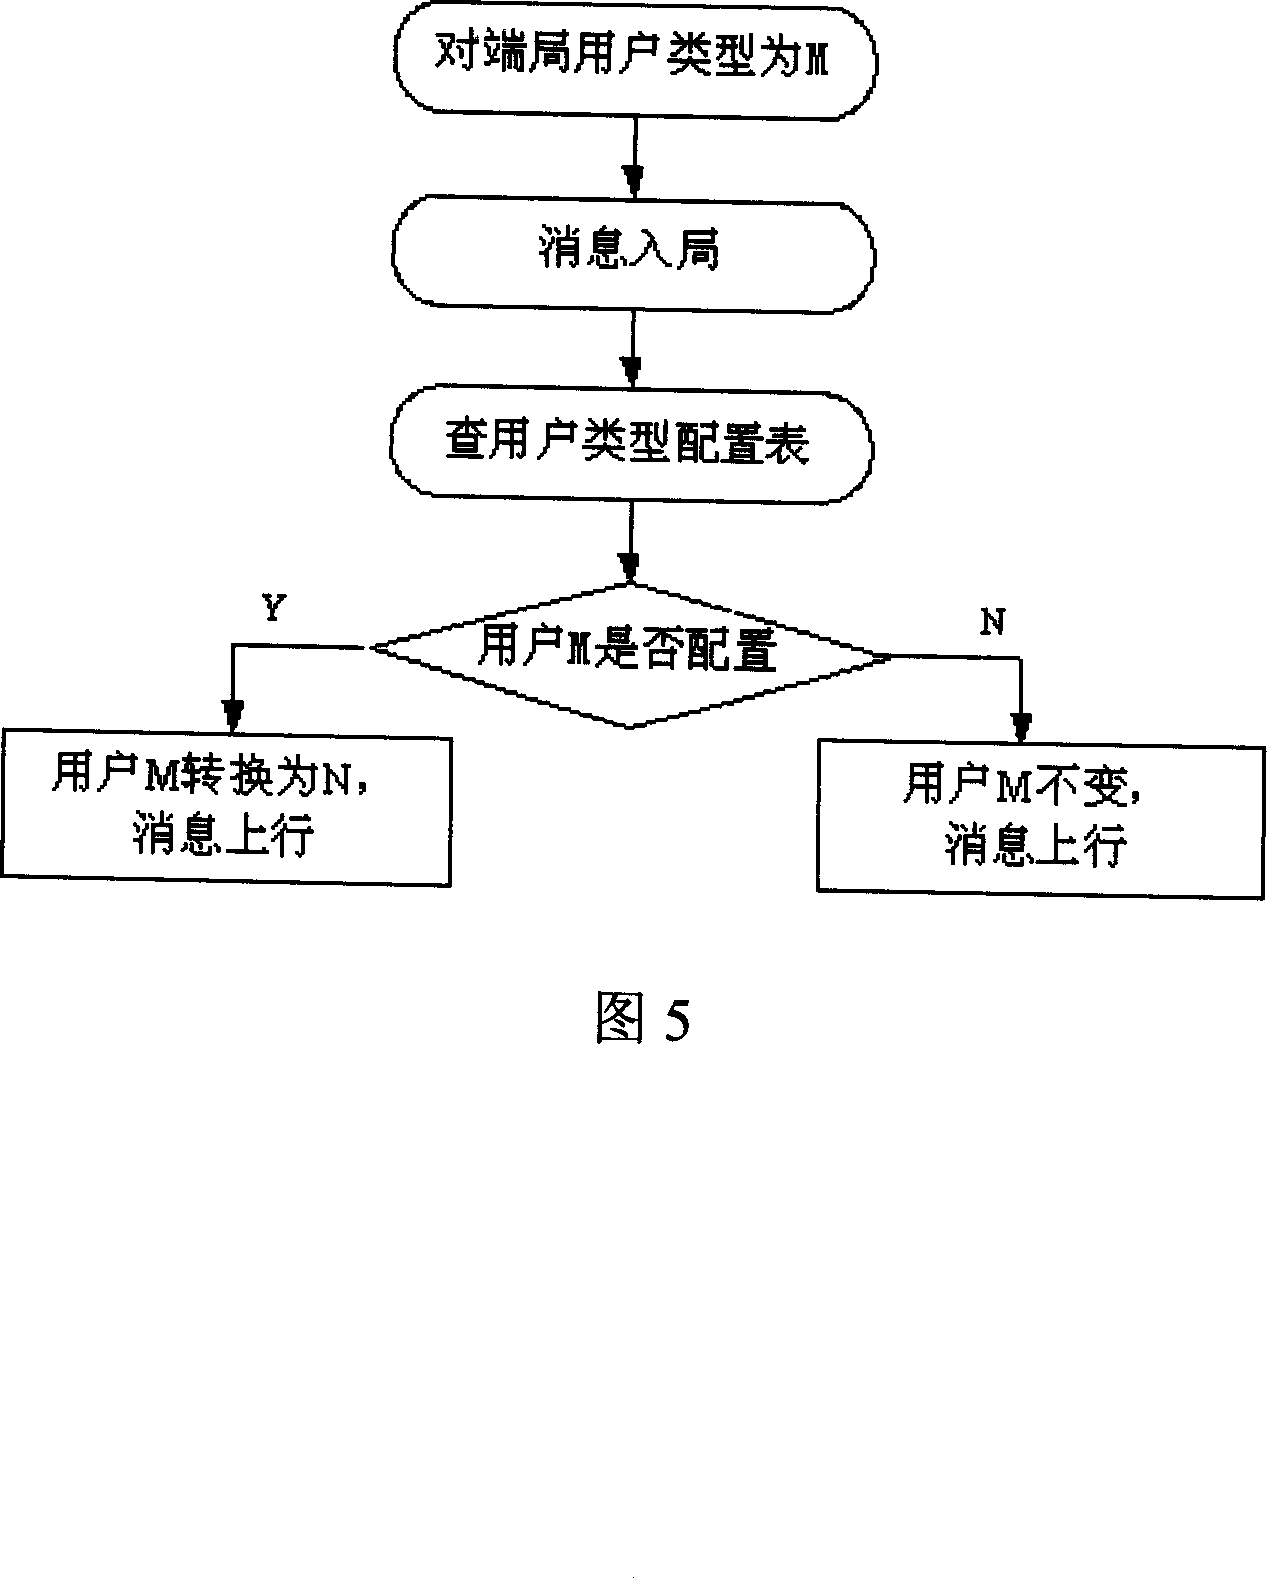 A device and method supporting flexible connection of the non-standard users of the protocols for different layers